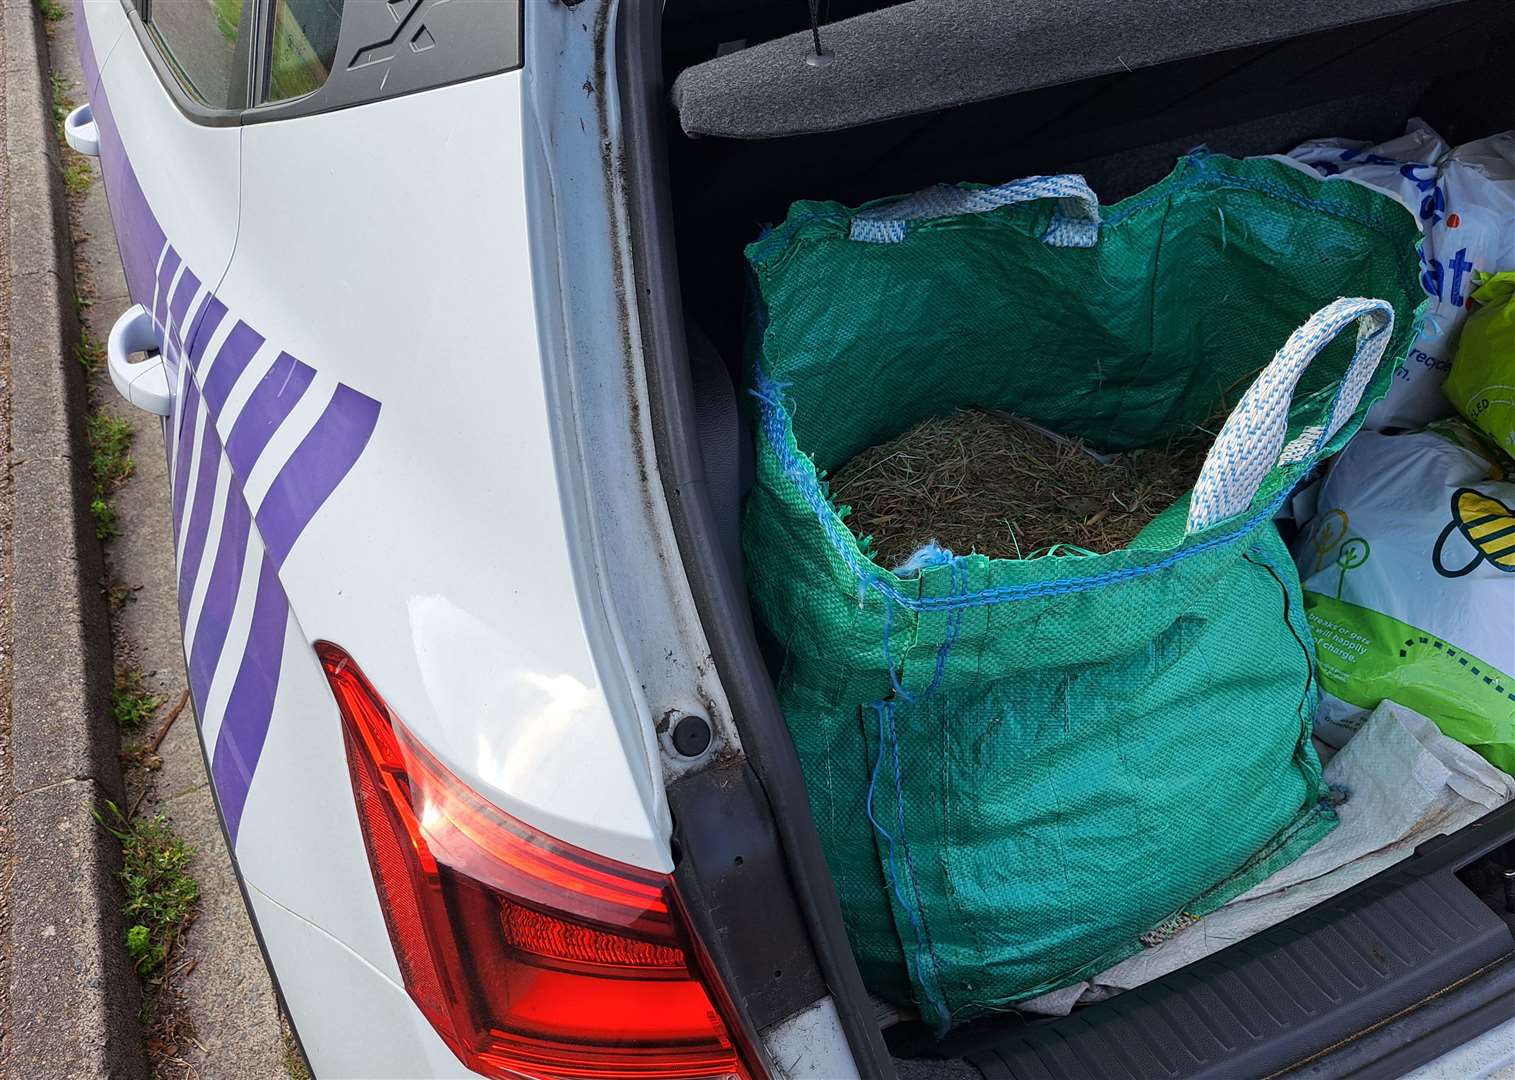 Our KentOnline reporter took the waste away in his car, to be dumped at the tip this weekend